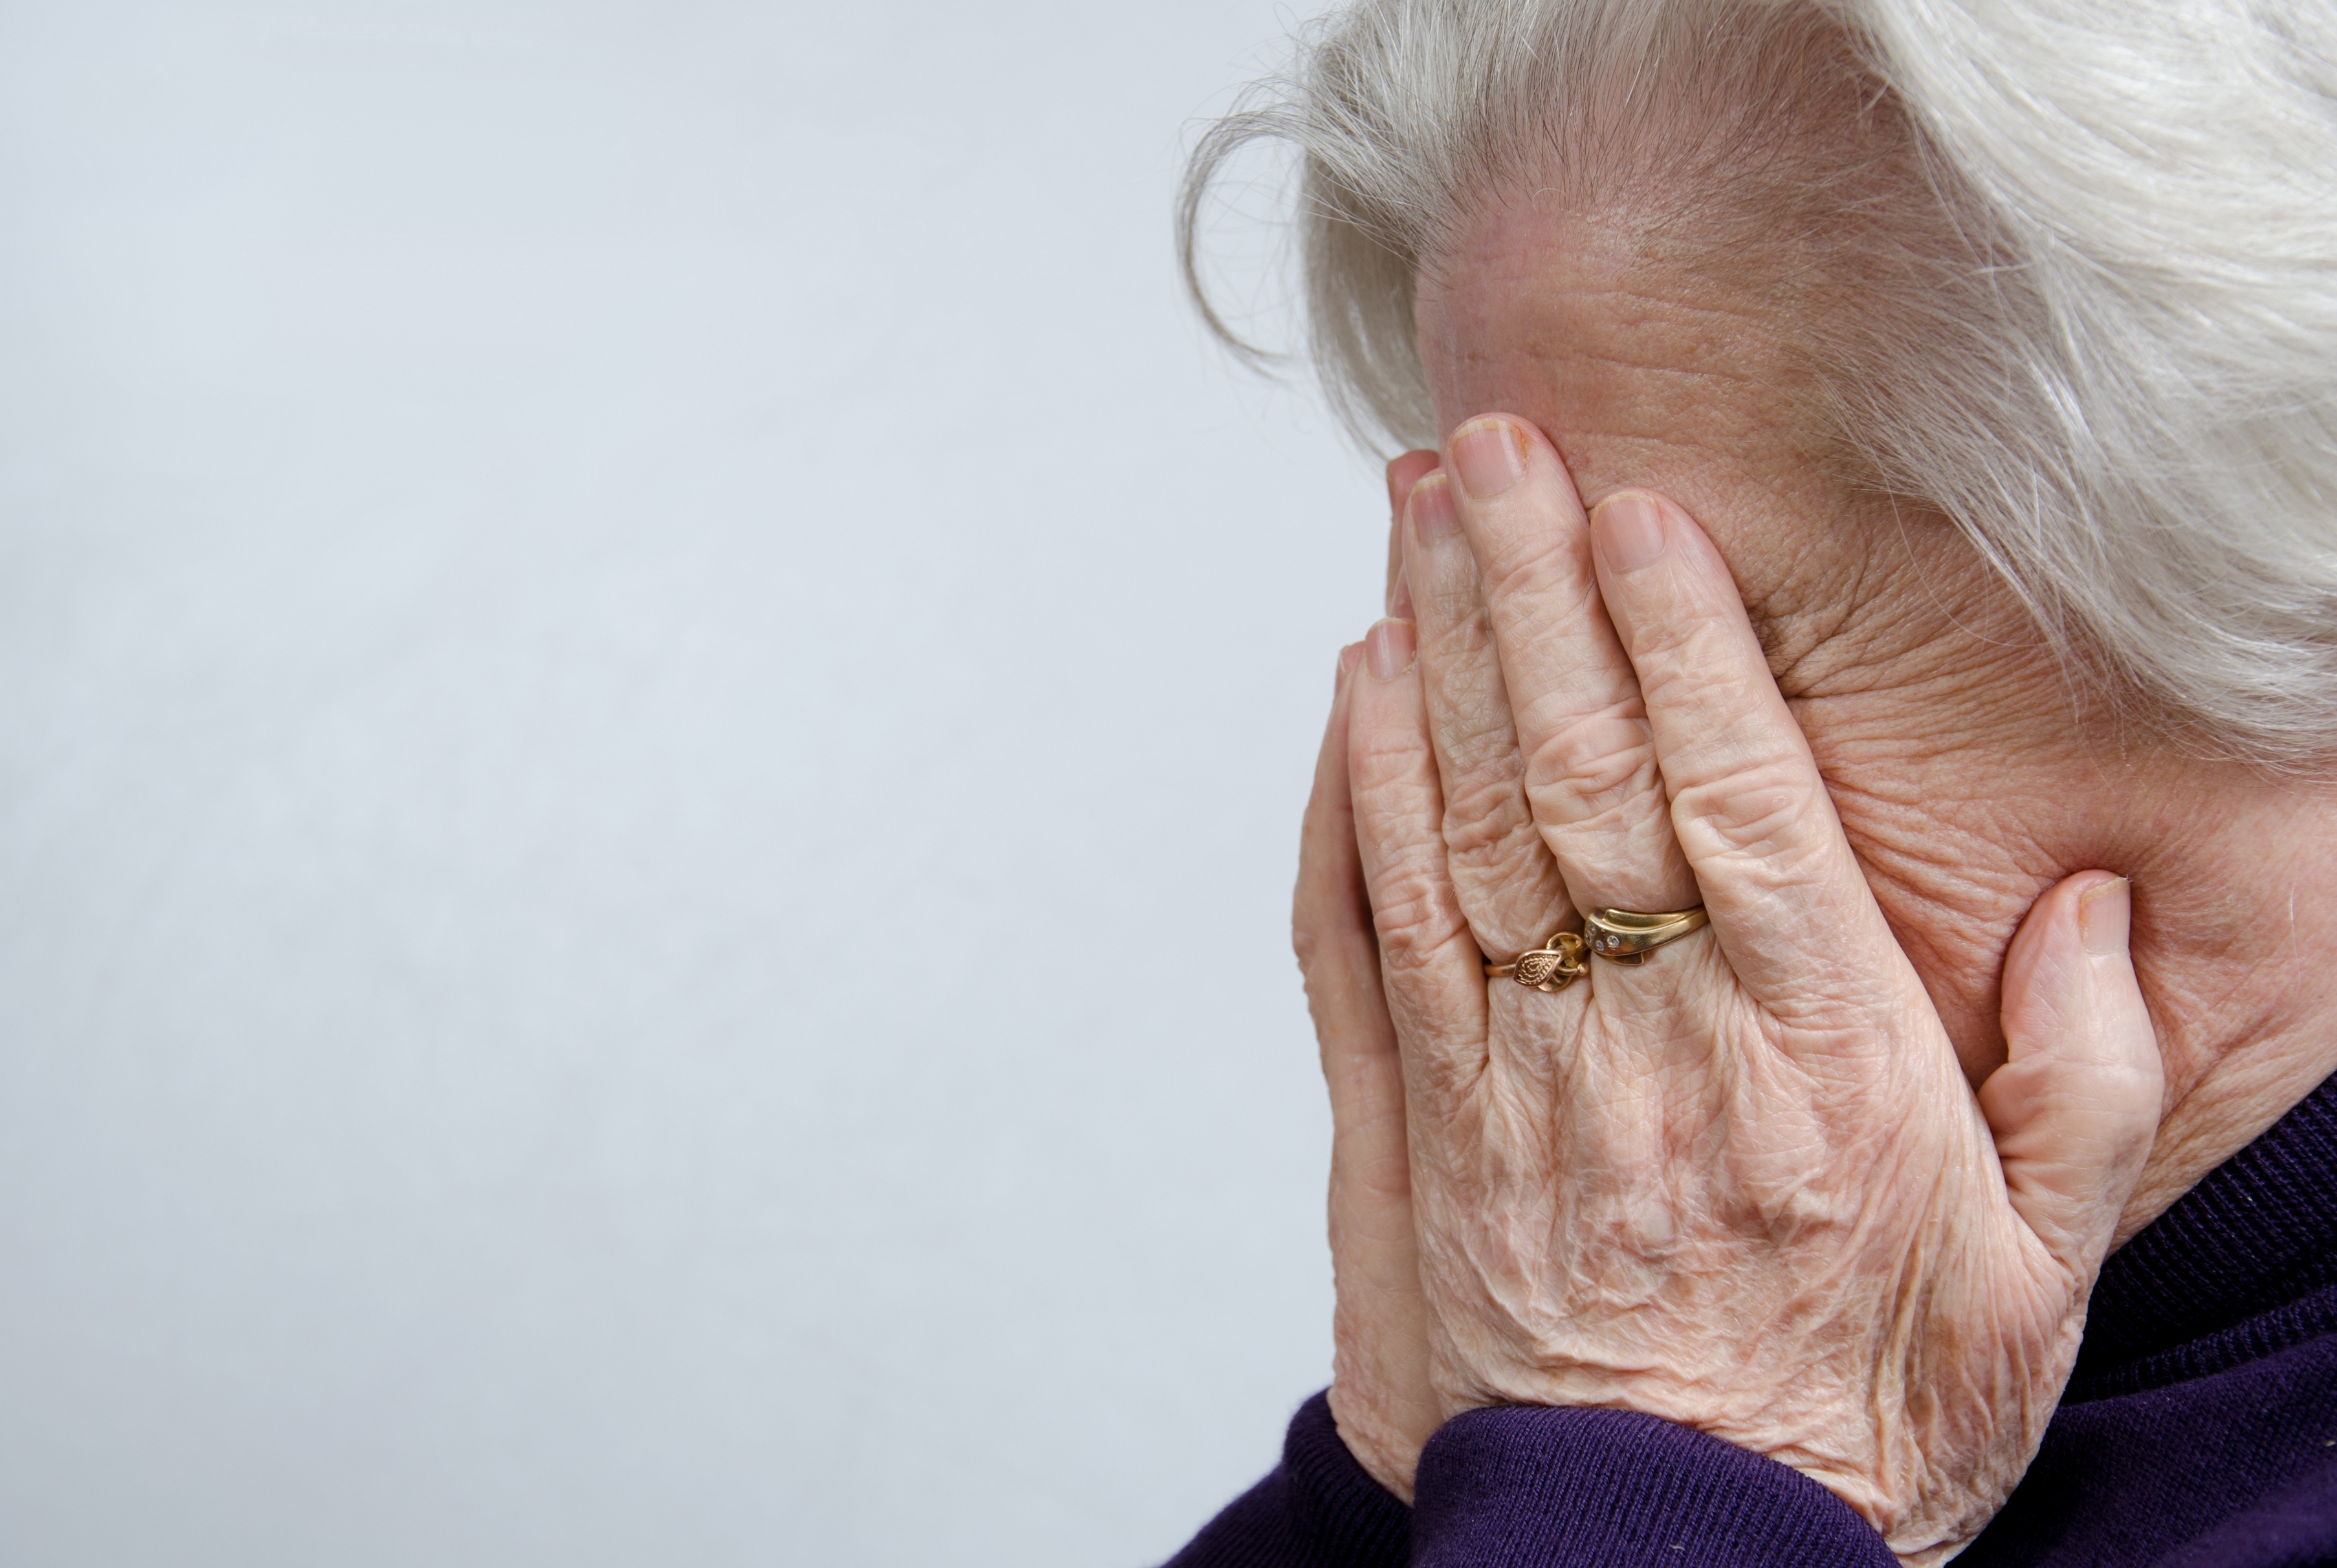 A crying elderly woman | Source: Shutterstock